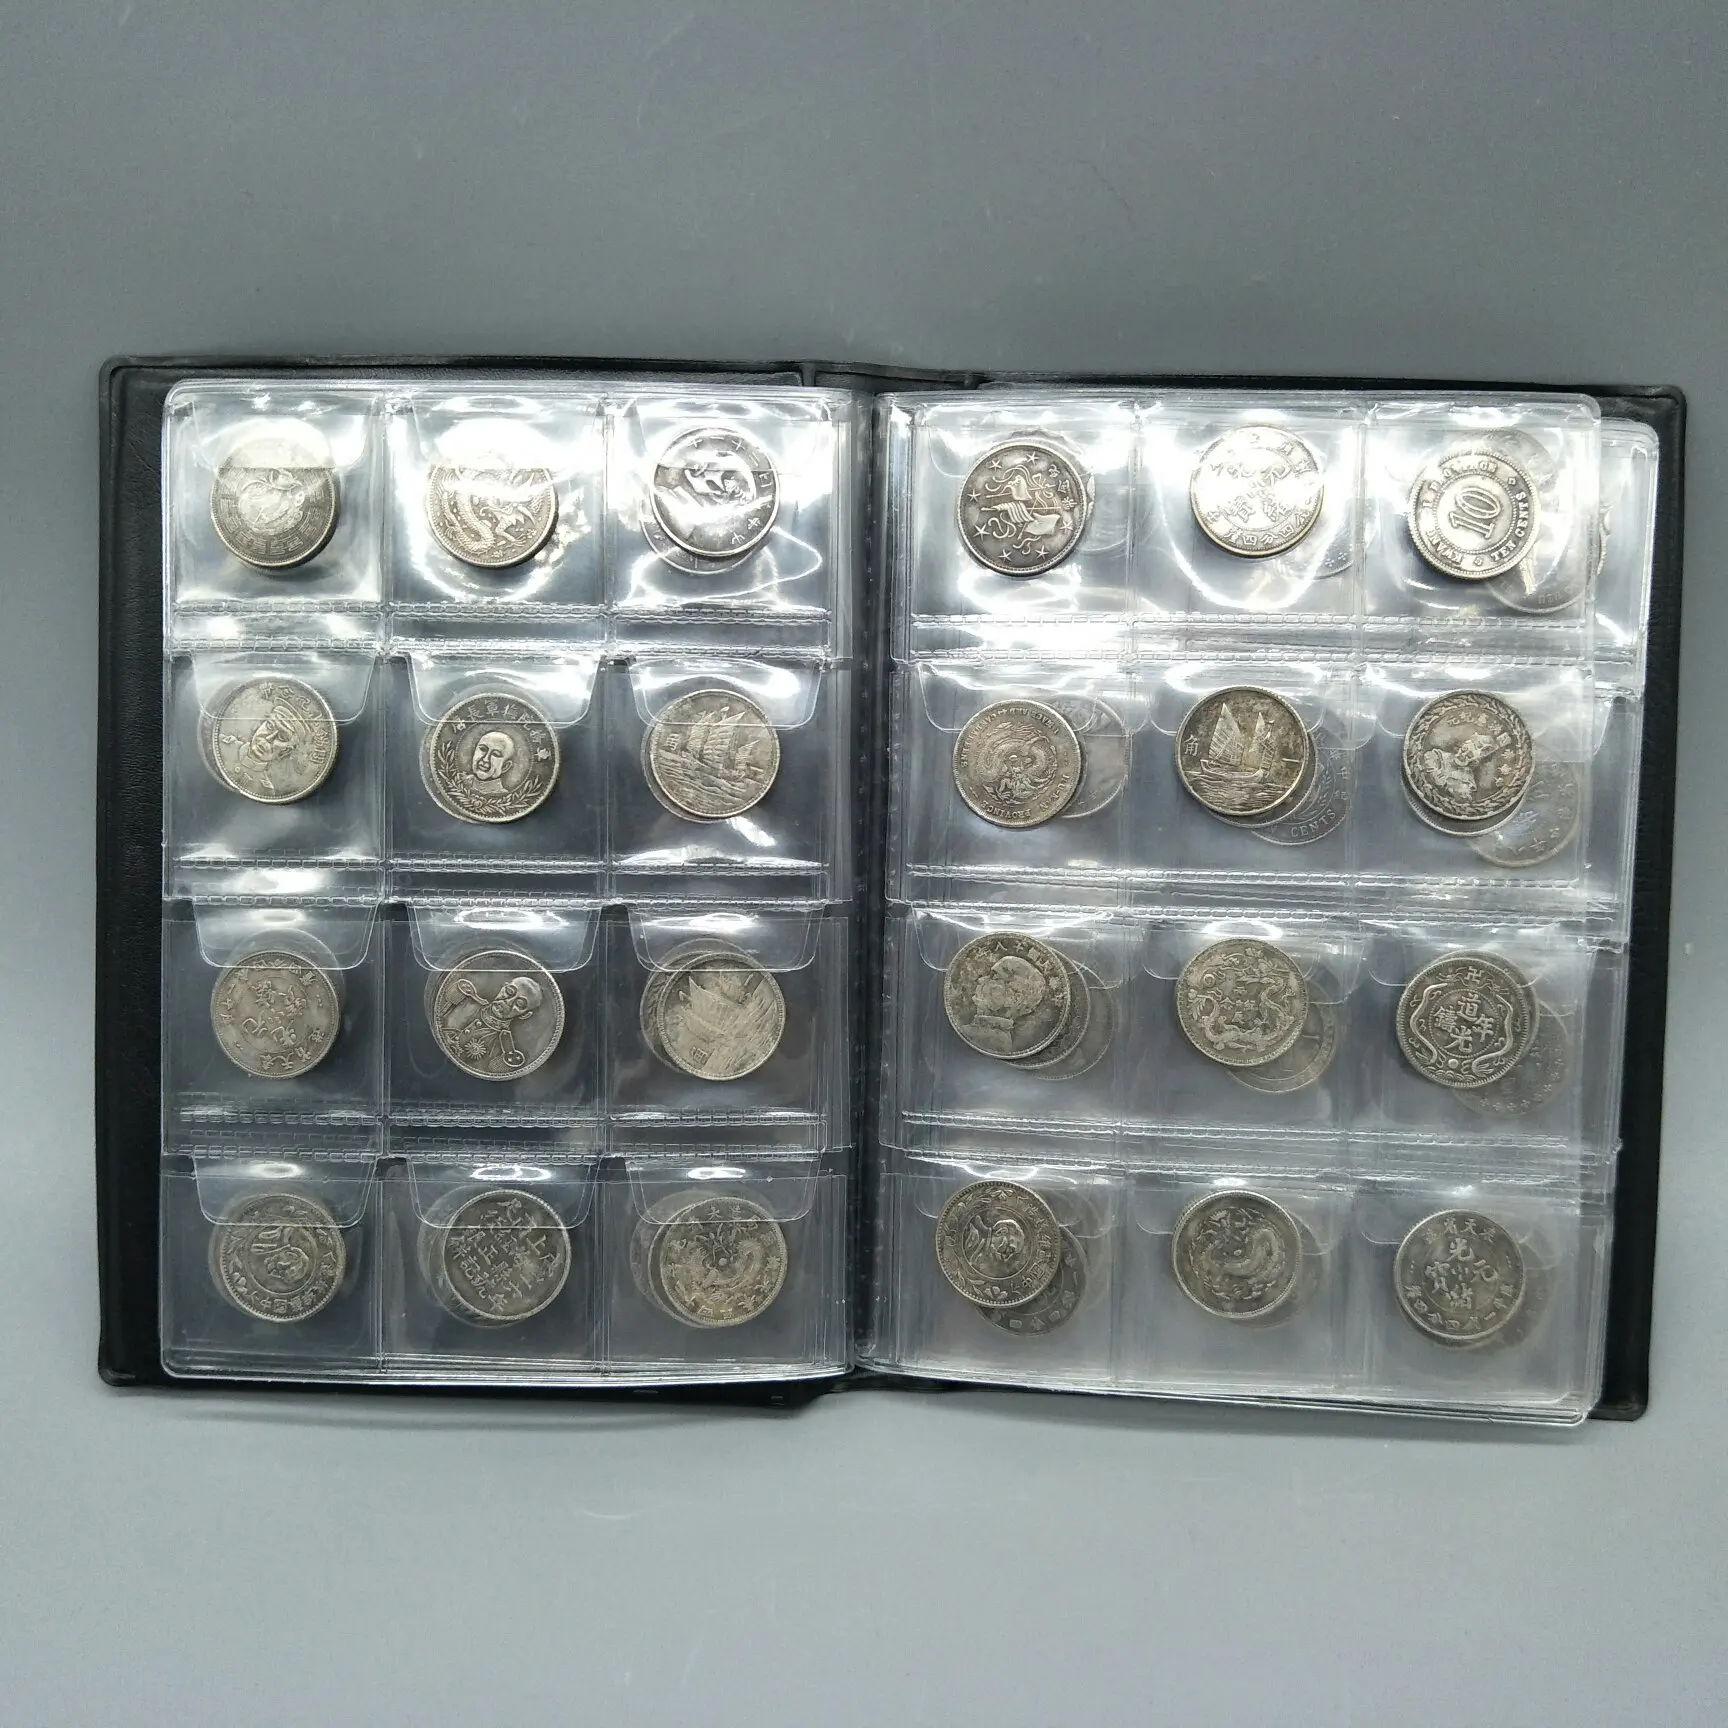 

120 Pieces/Collect Ancient China Coins,Silver Dollar Set, Metal Handicraft Home Decoration